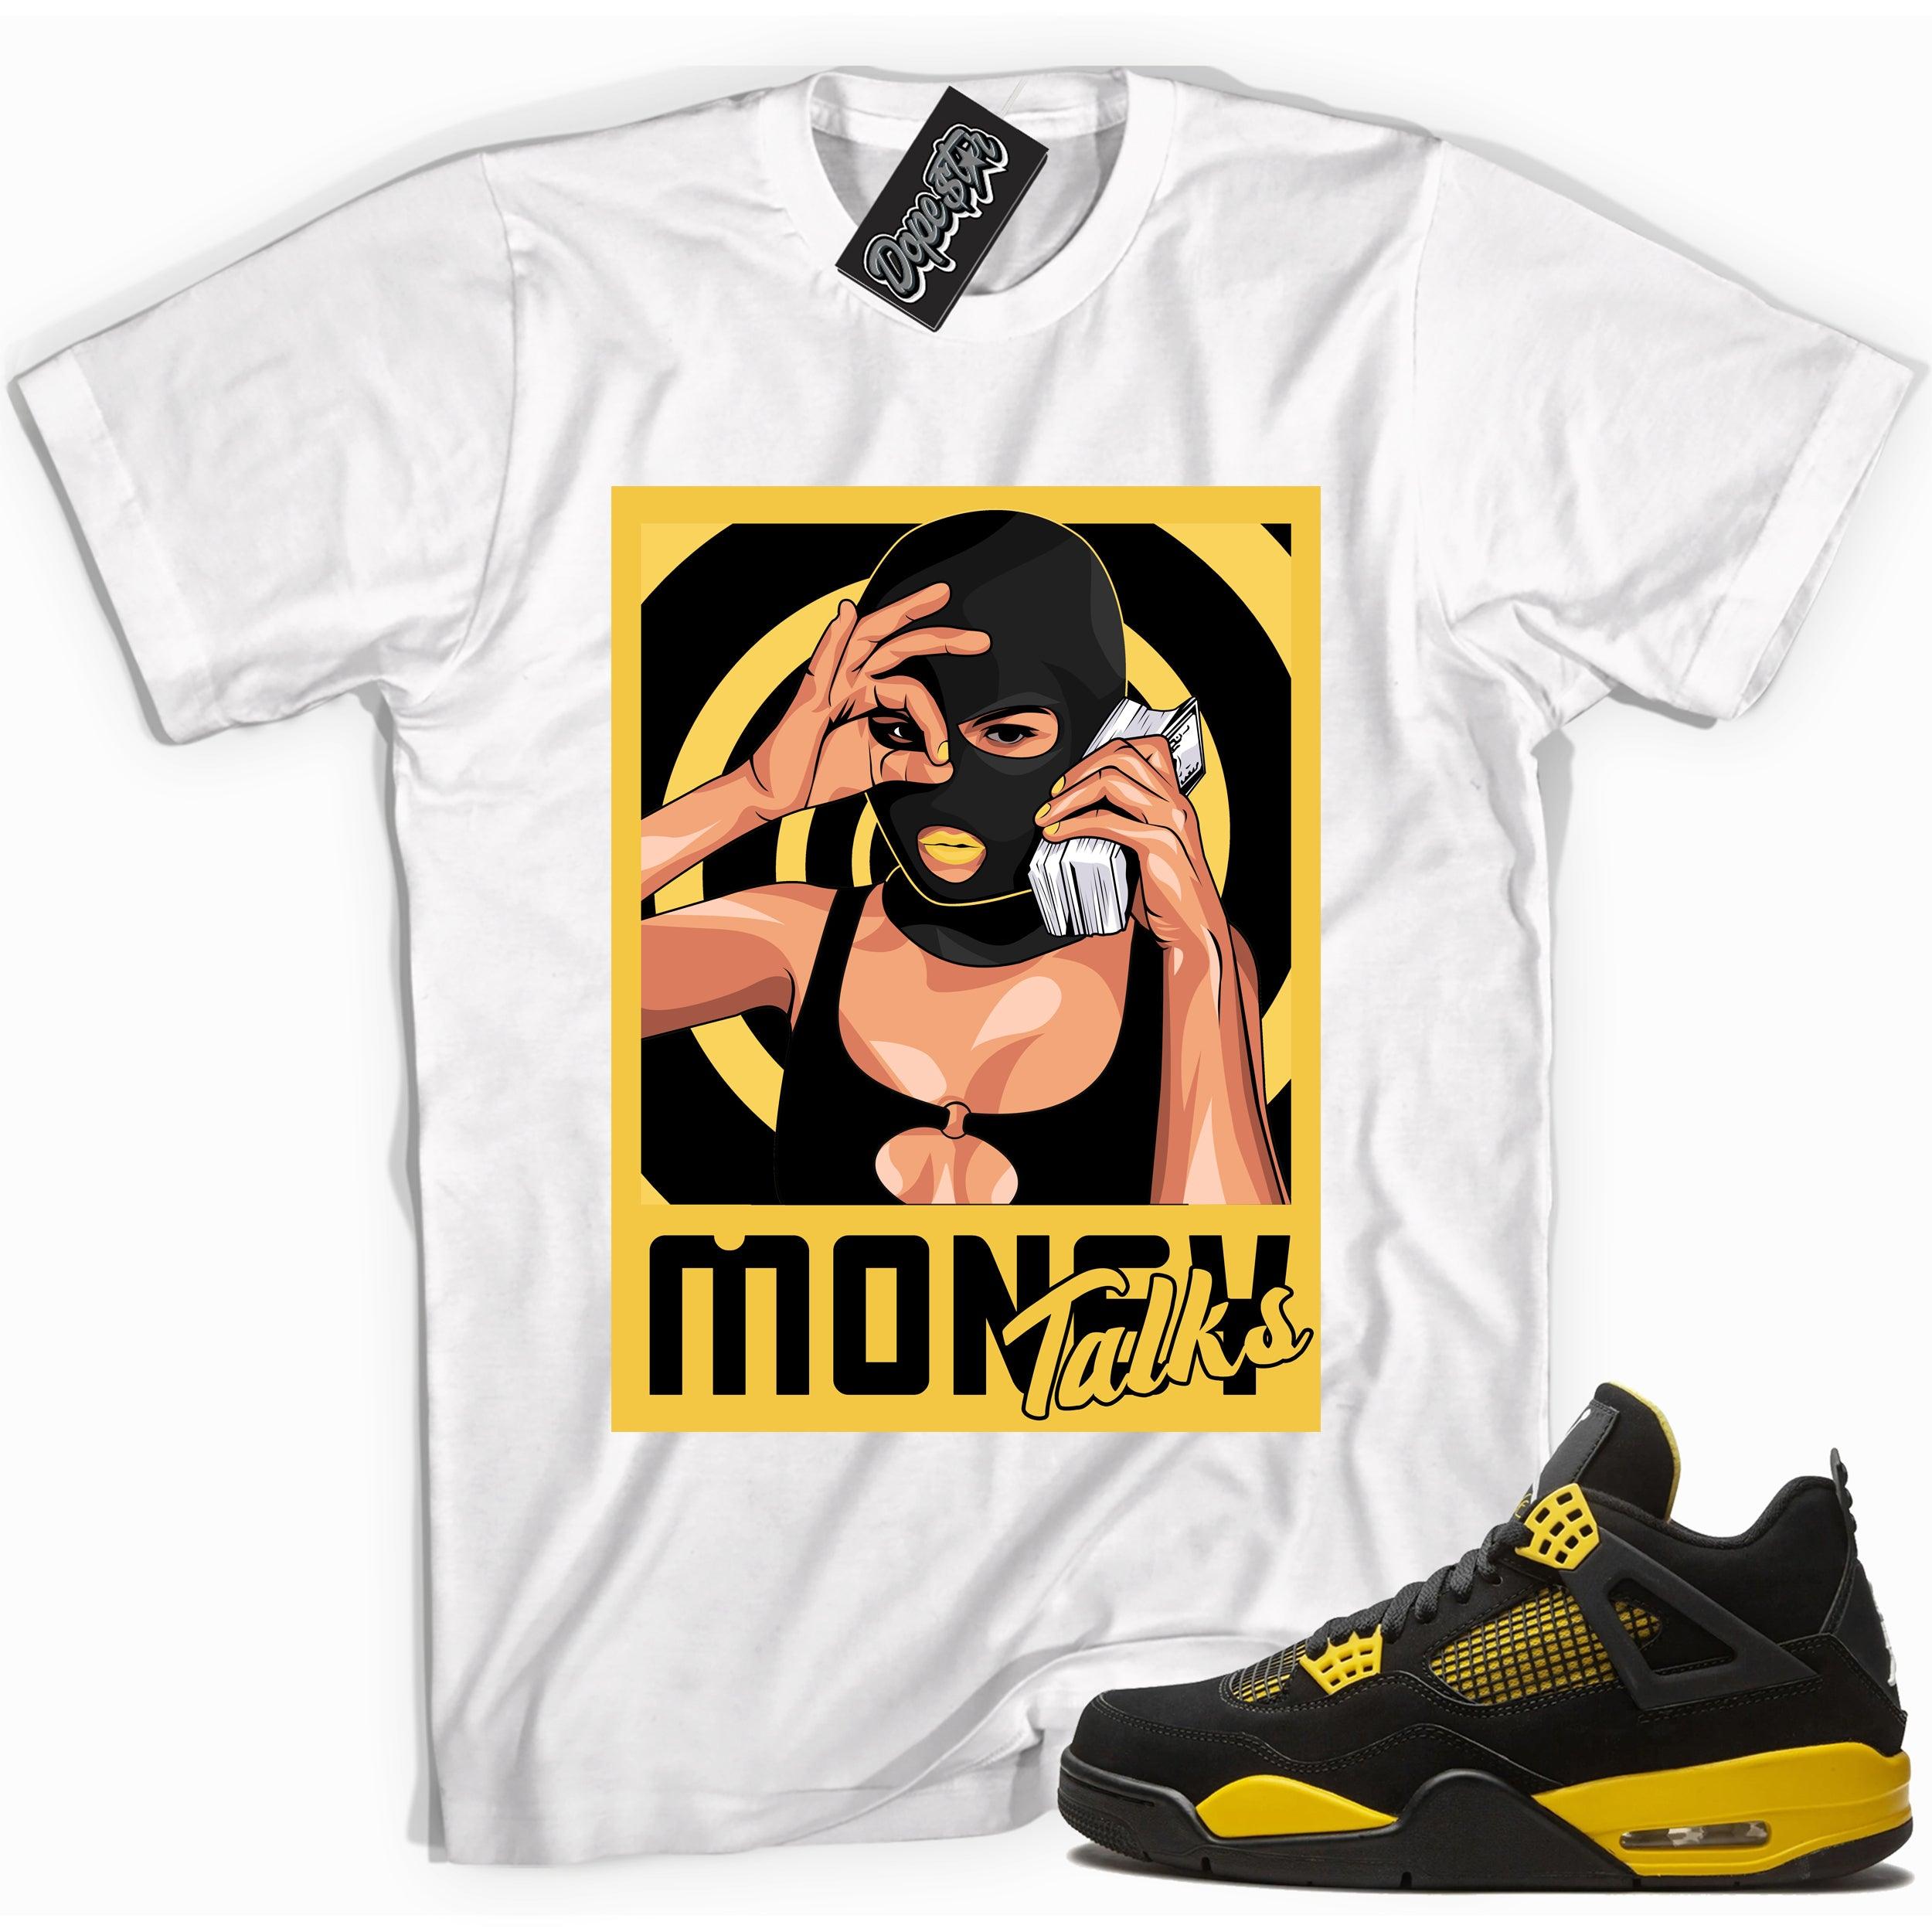 Cool white  graphic tee with 'King' print, that perfectly matches  Air Jordan 4 Thunder sneakers